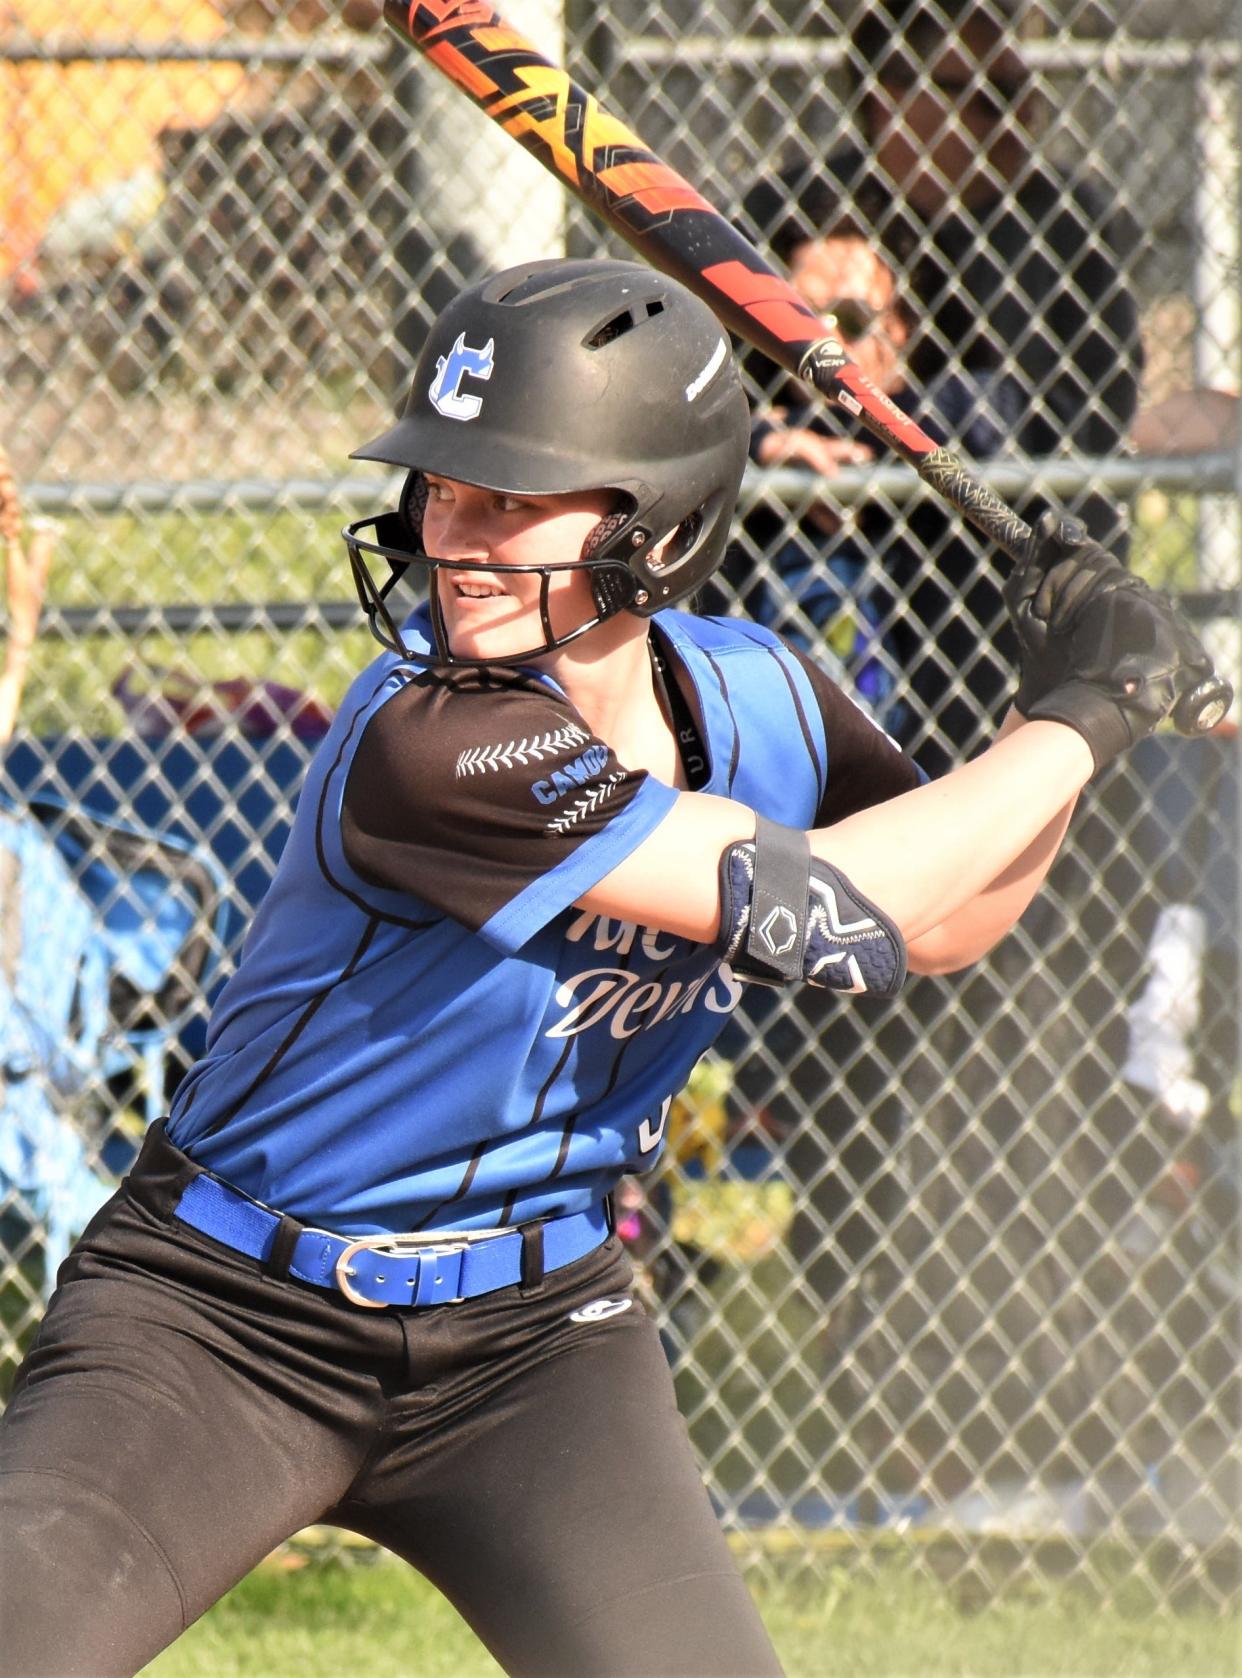 Camden senior Brooke Musch, an all-state selection the last three softball seasons, homered twice against Central Valley Academy at Lower Tolpa  Saturday as part of a stretch that saw her hit six home runs in five-game span for the 9-1 Blue Devils.